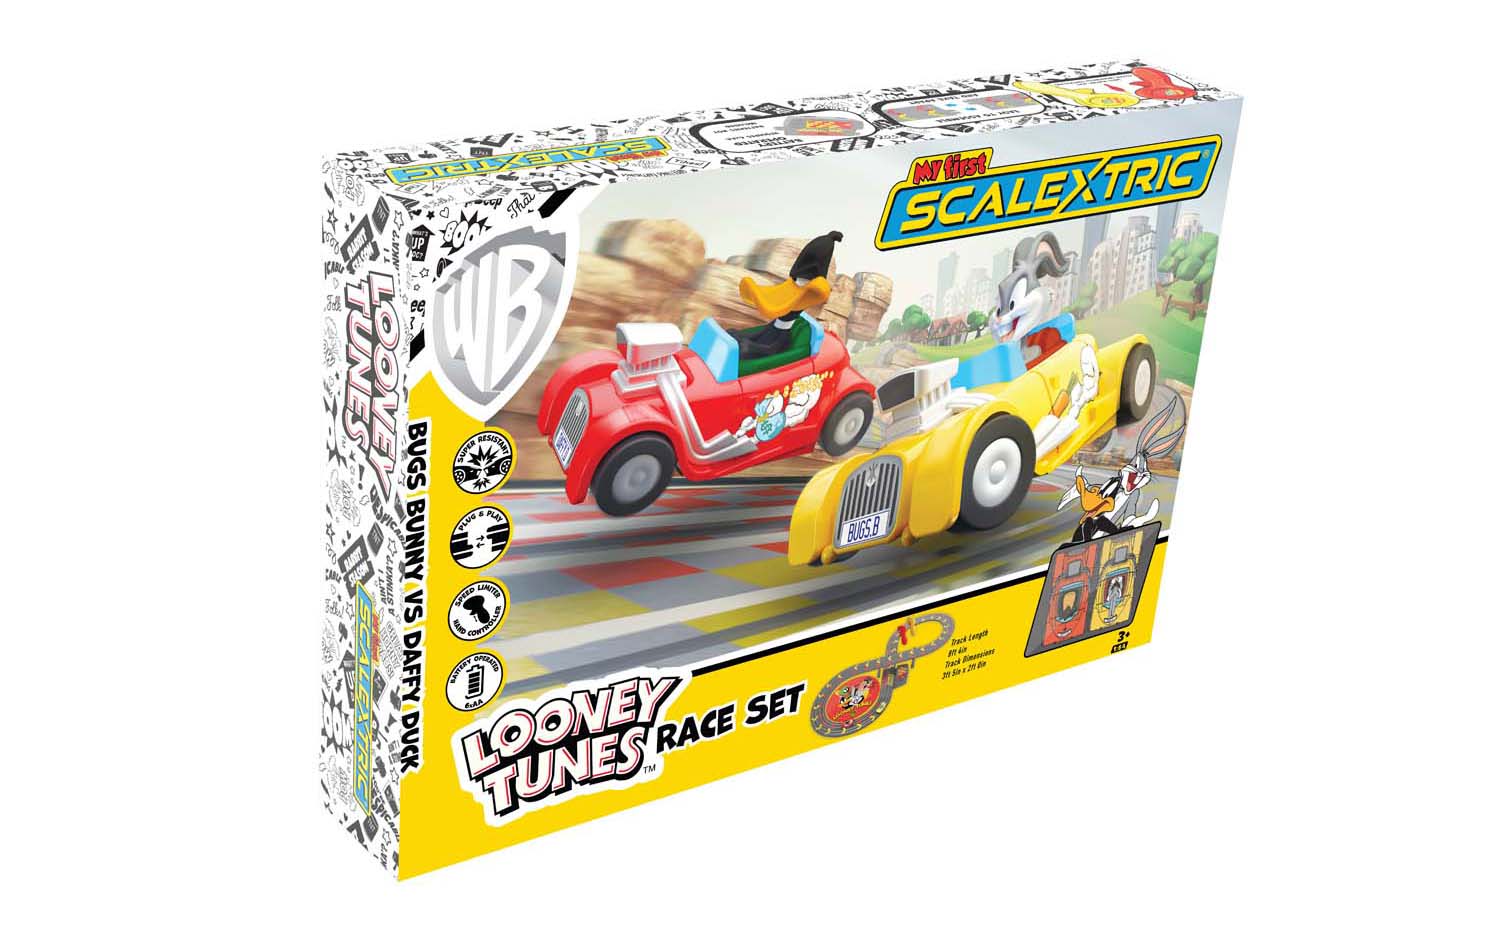 Scalextric G2165 Looney Tunes Wile E Coyote Car 1 64 Scale for sale online 